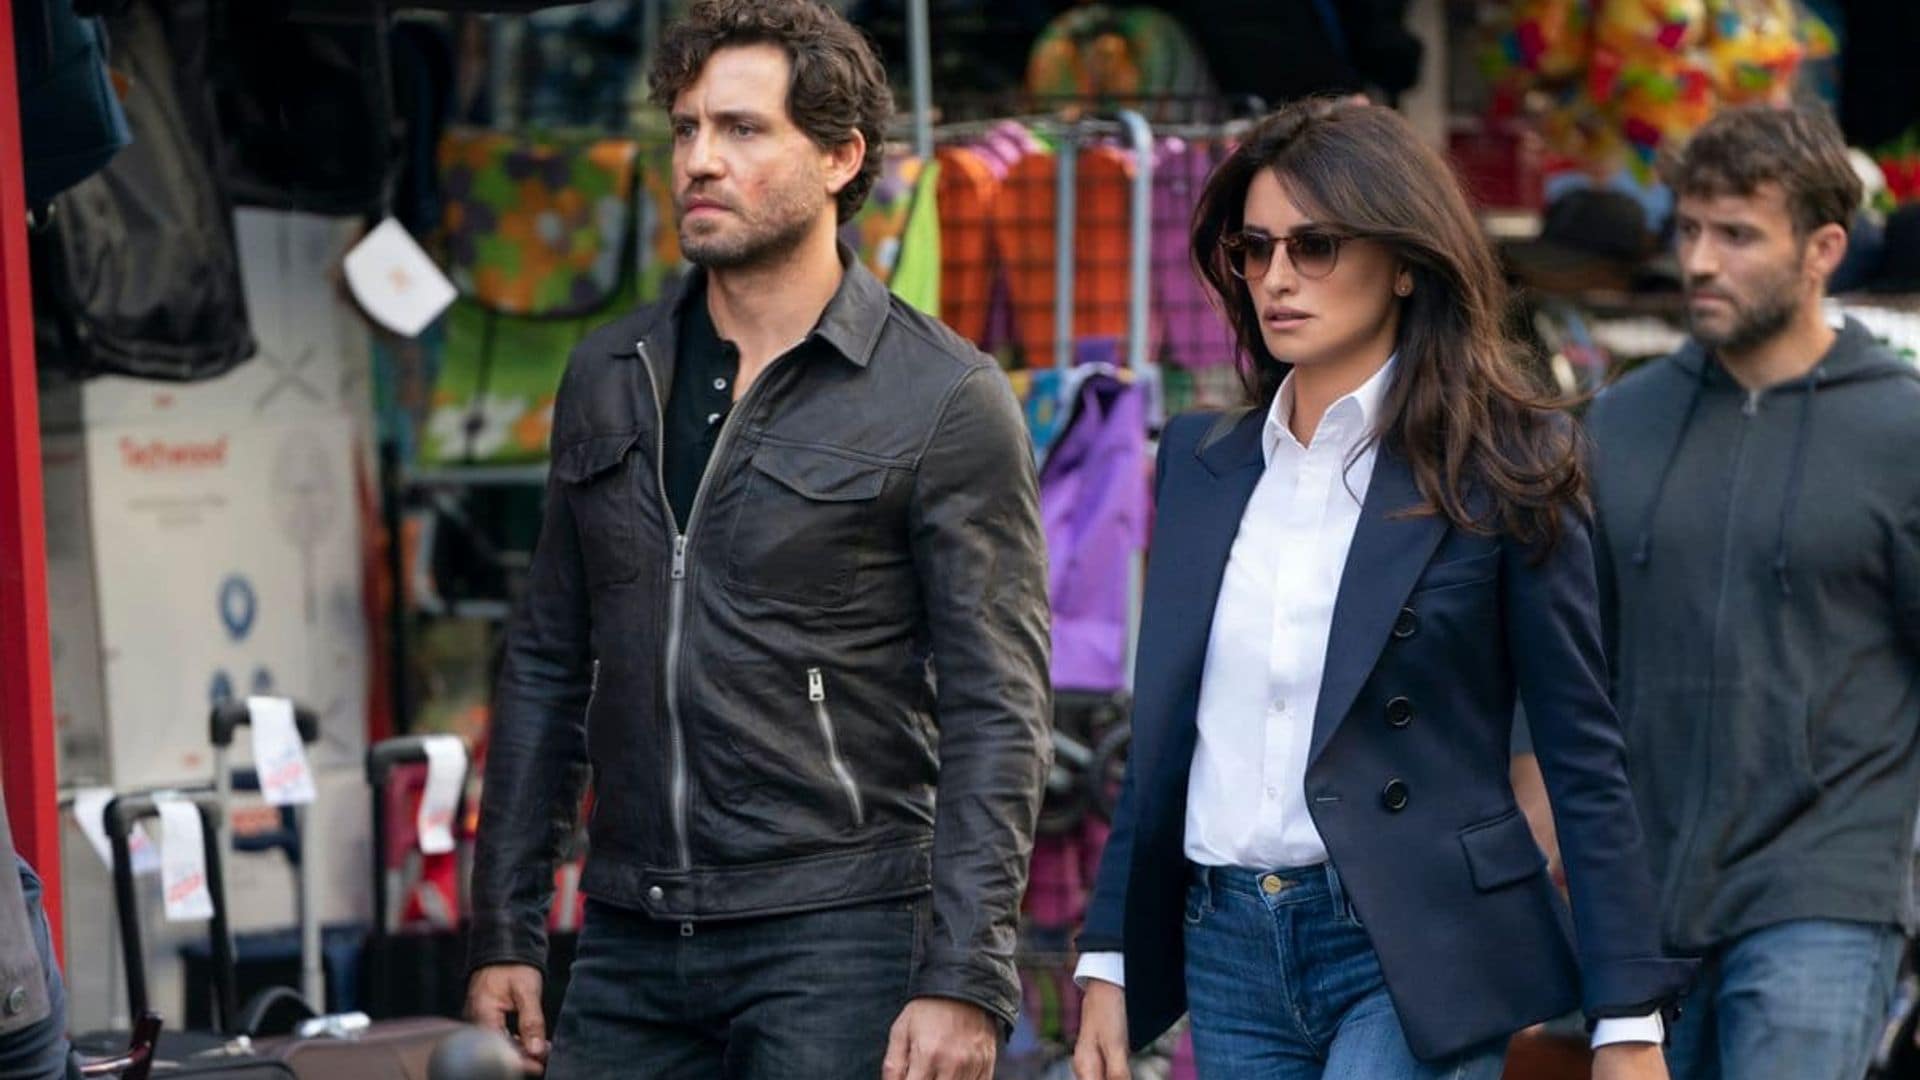 Penelope Cruz is coming back to the big screen with The 355 Movie